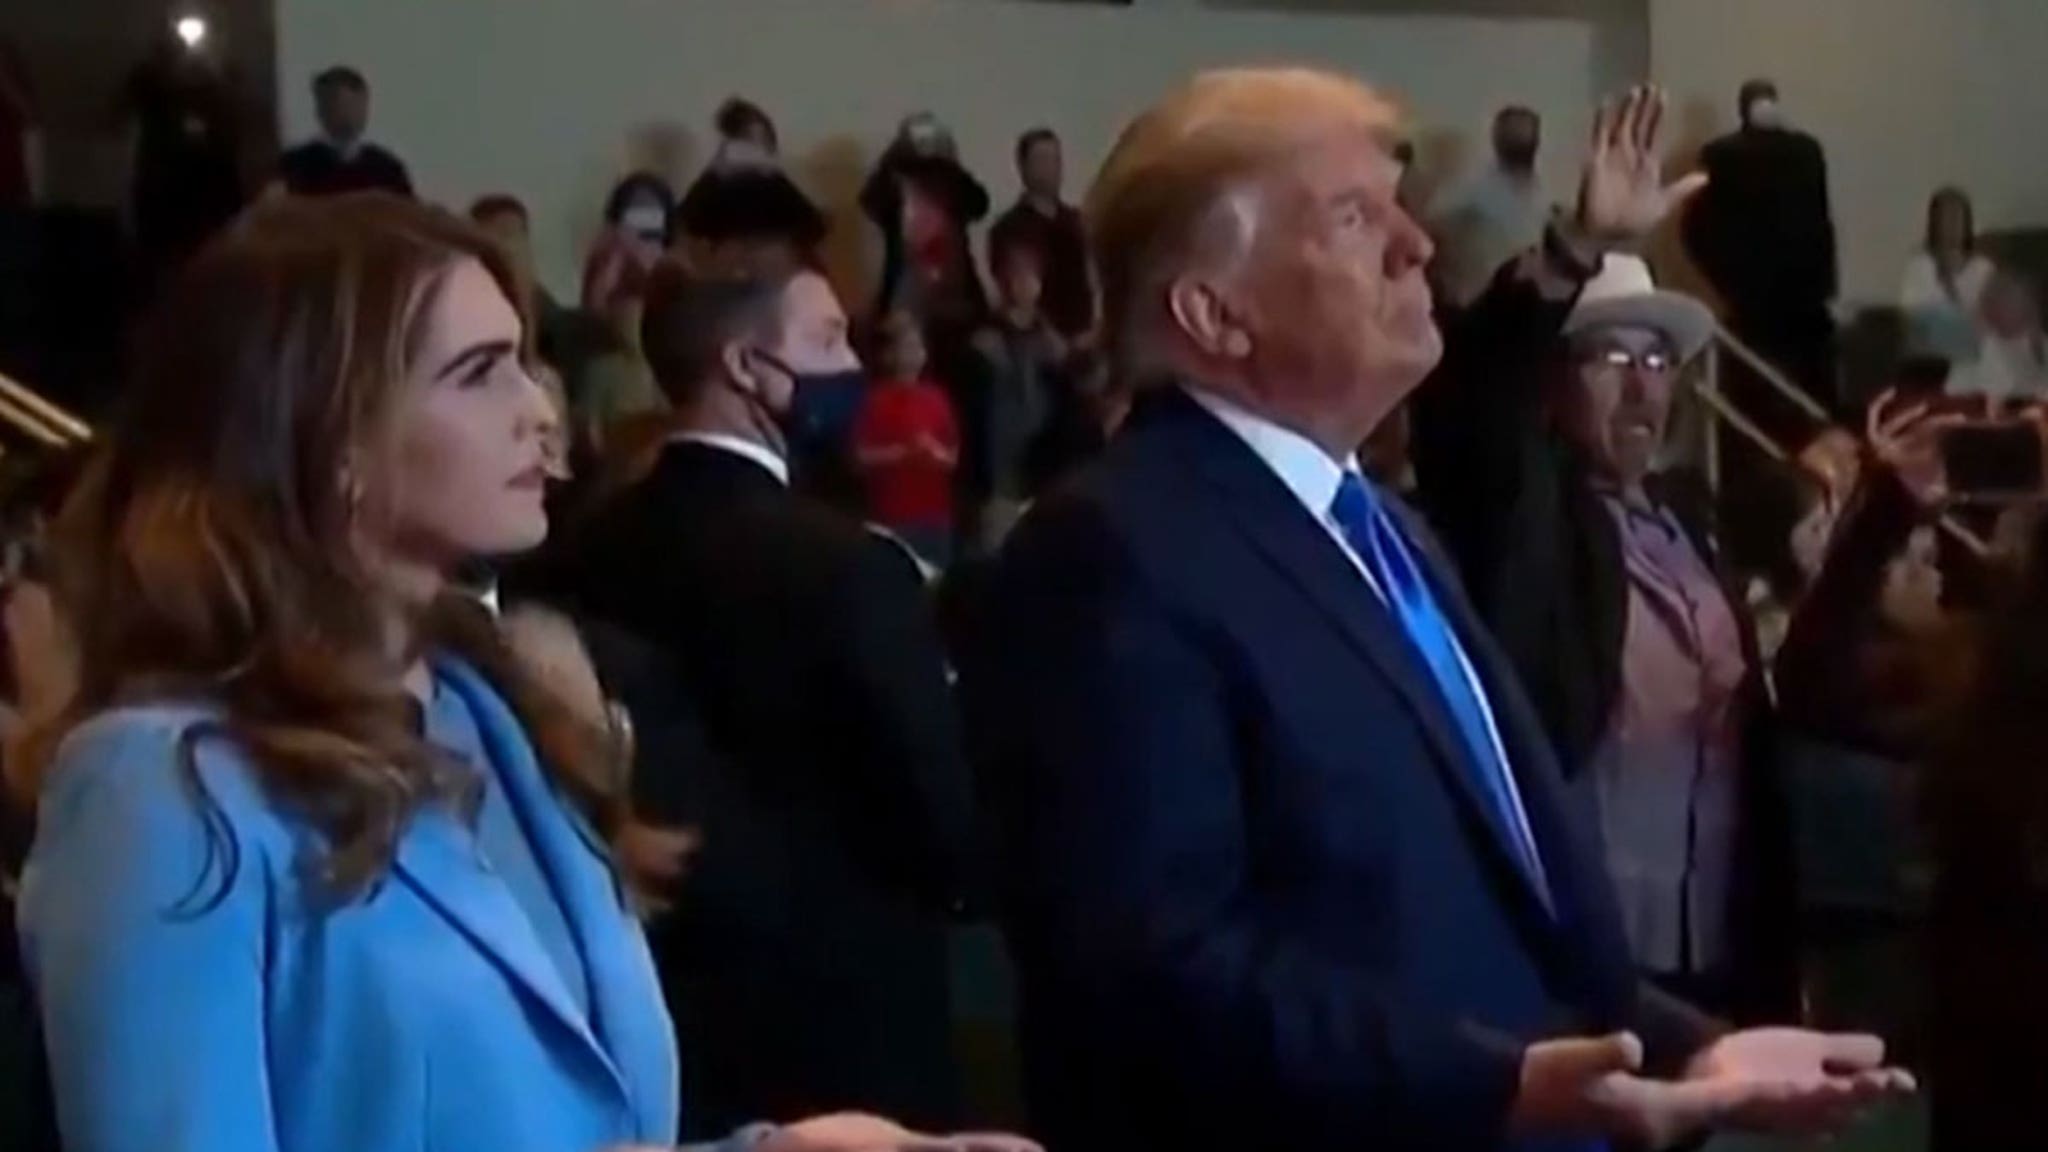 Trump Blessed at Las Vegas Church, Pastor Says God Told Her He'll Win Election - TMZ